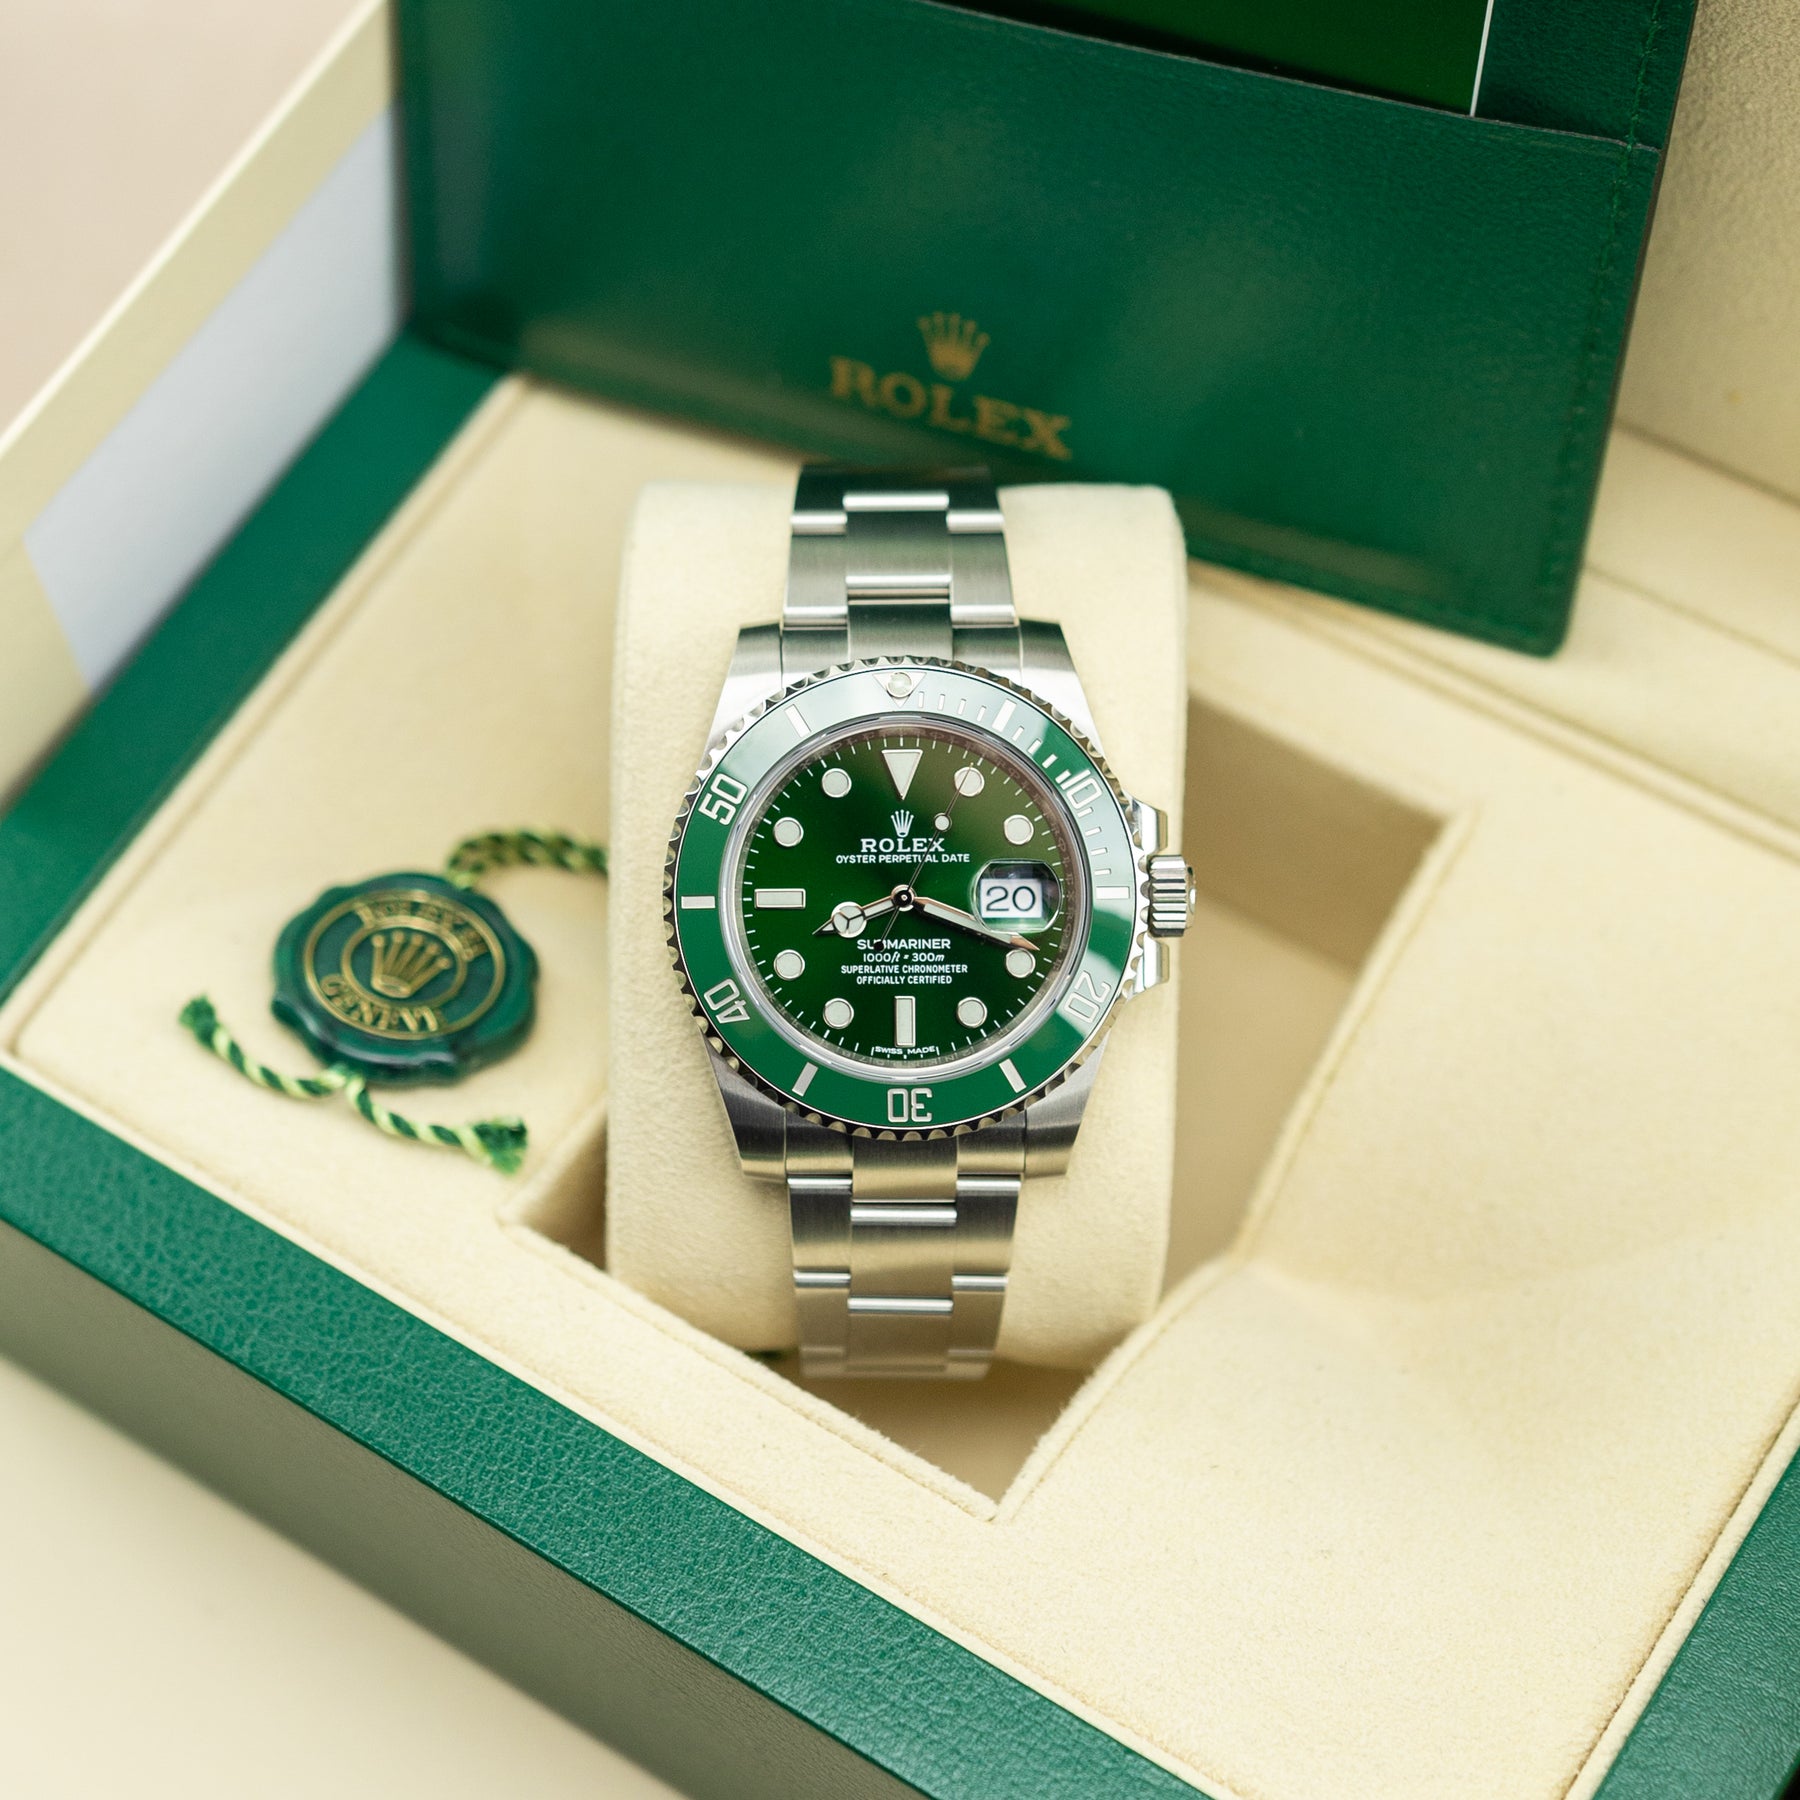 2019 Rolex SUBMARINER DATE 'Hulk', Oystersteel, 40mm 116610LV Available at RR Jewelllers